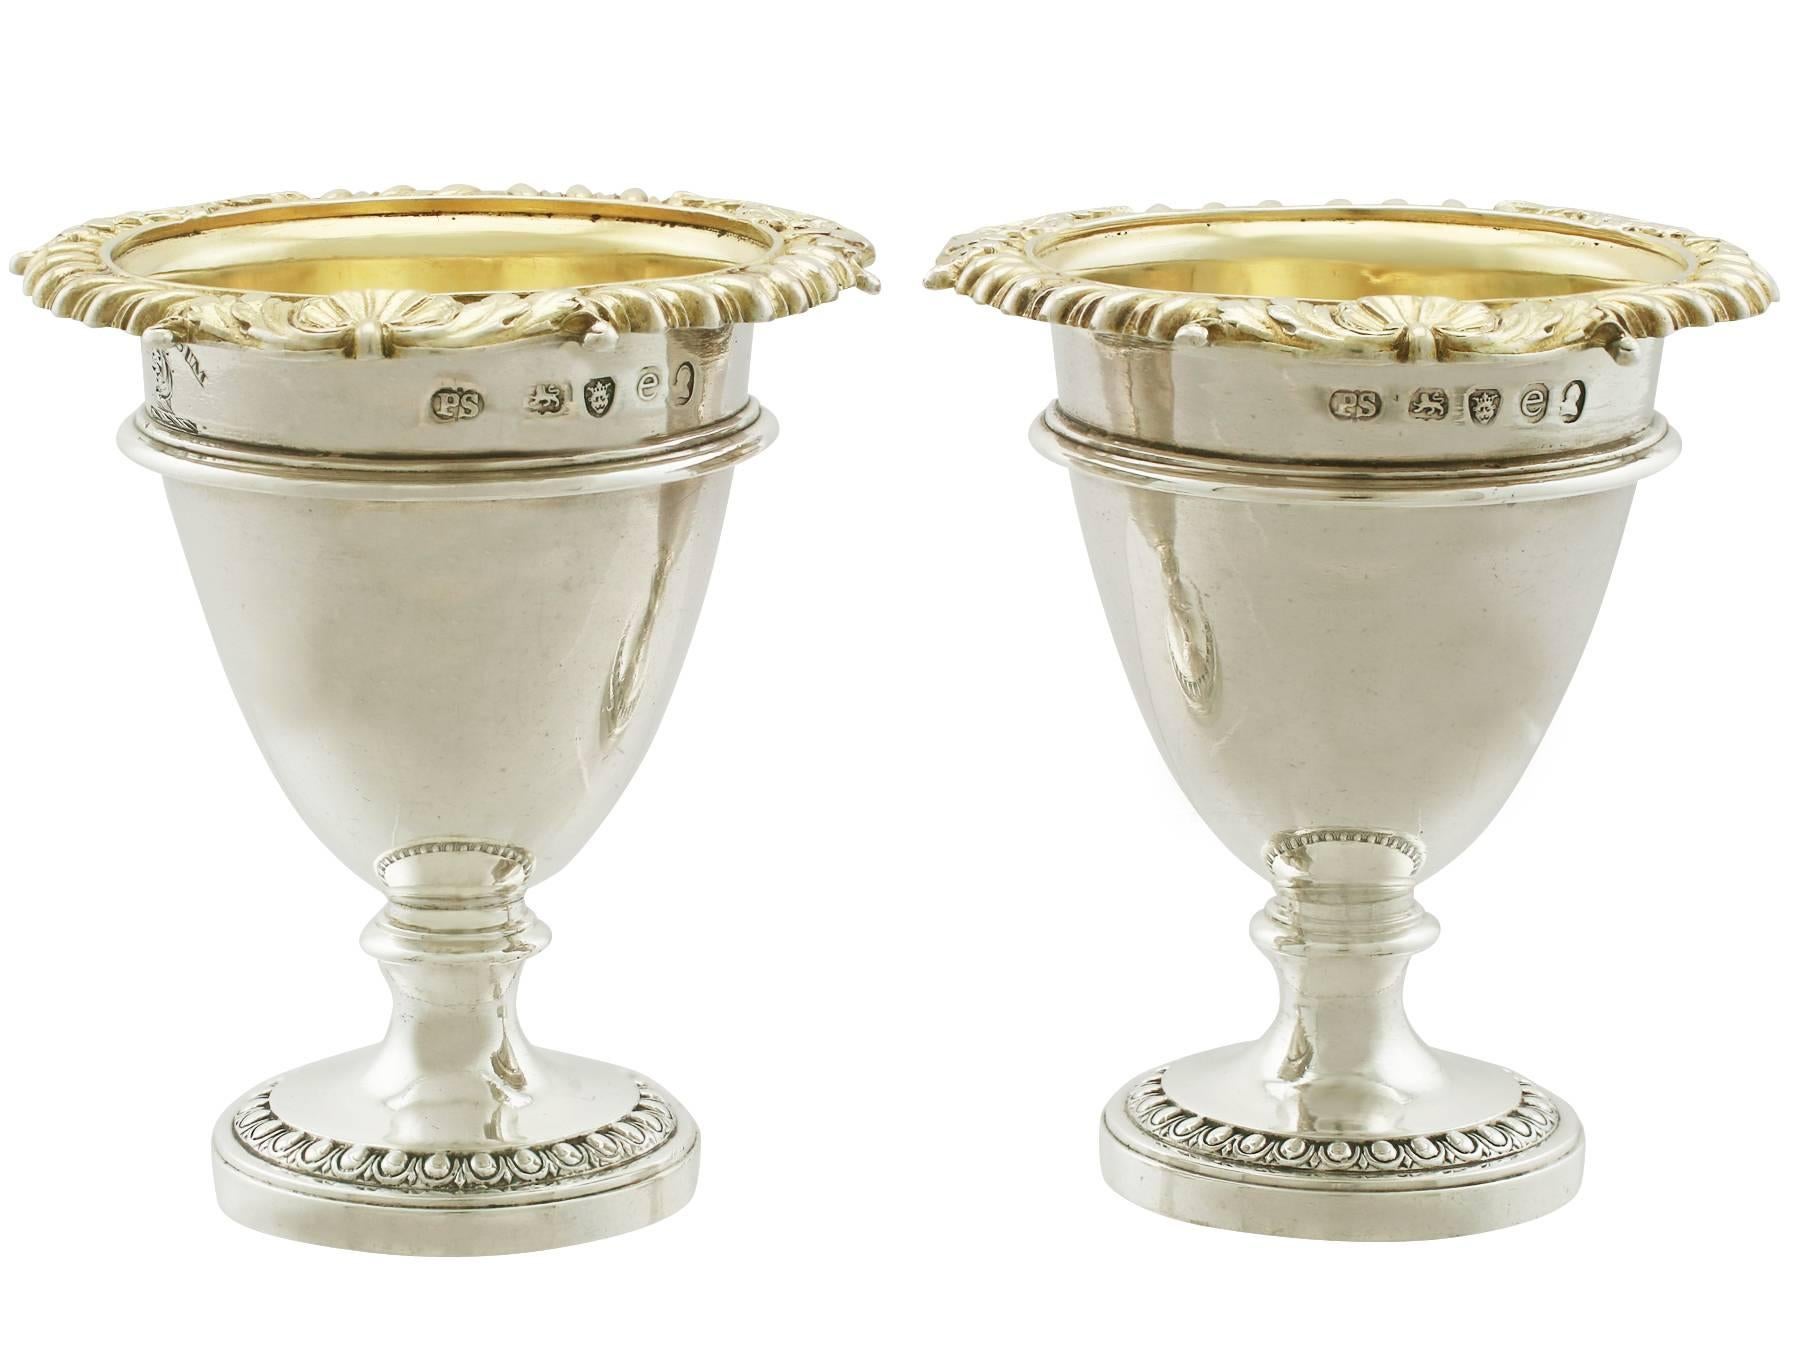 An exceptional, fine and impressive pair of antique George IV English sterling silver egg cups made by Paul Storr part of our dining silverware collection.

These exceptional antique George IV sterling silver egg cups have a bell shaped form to a